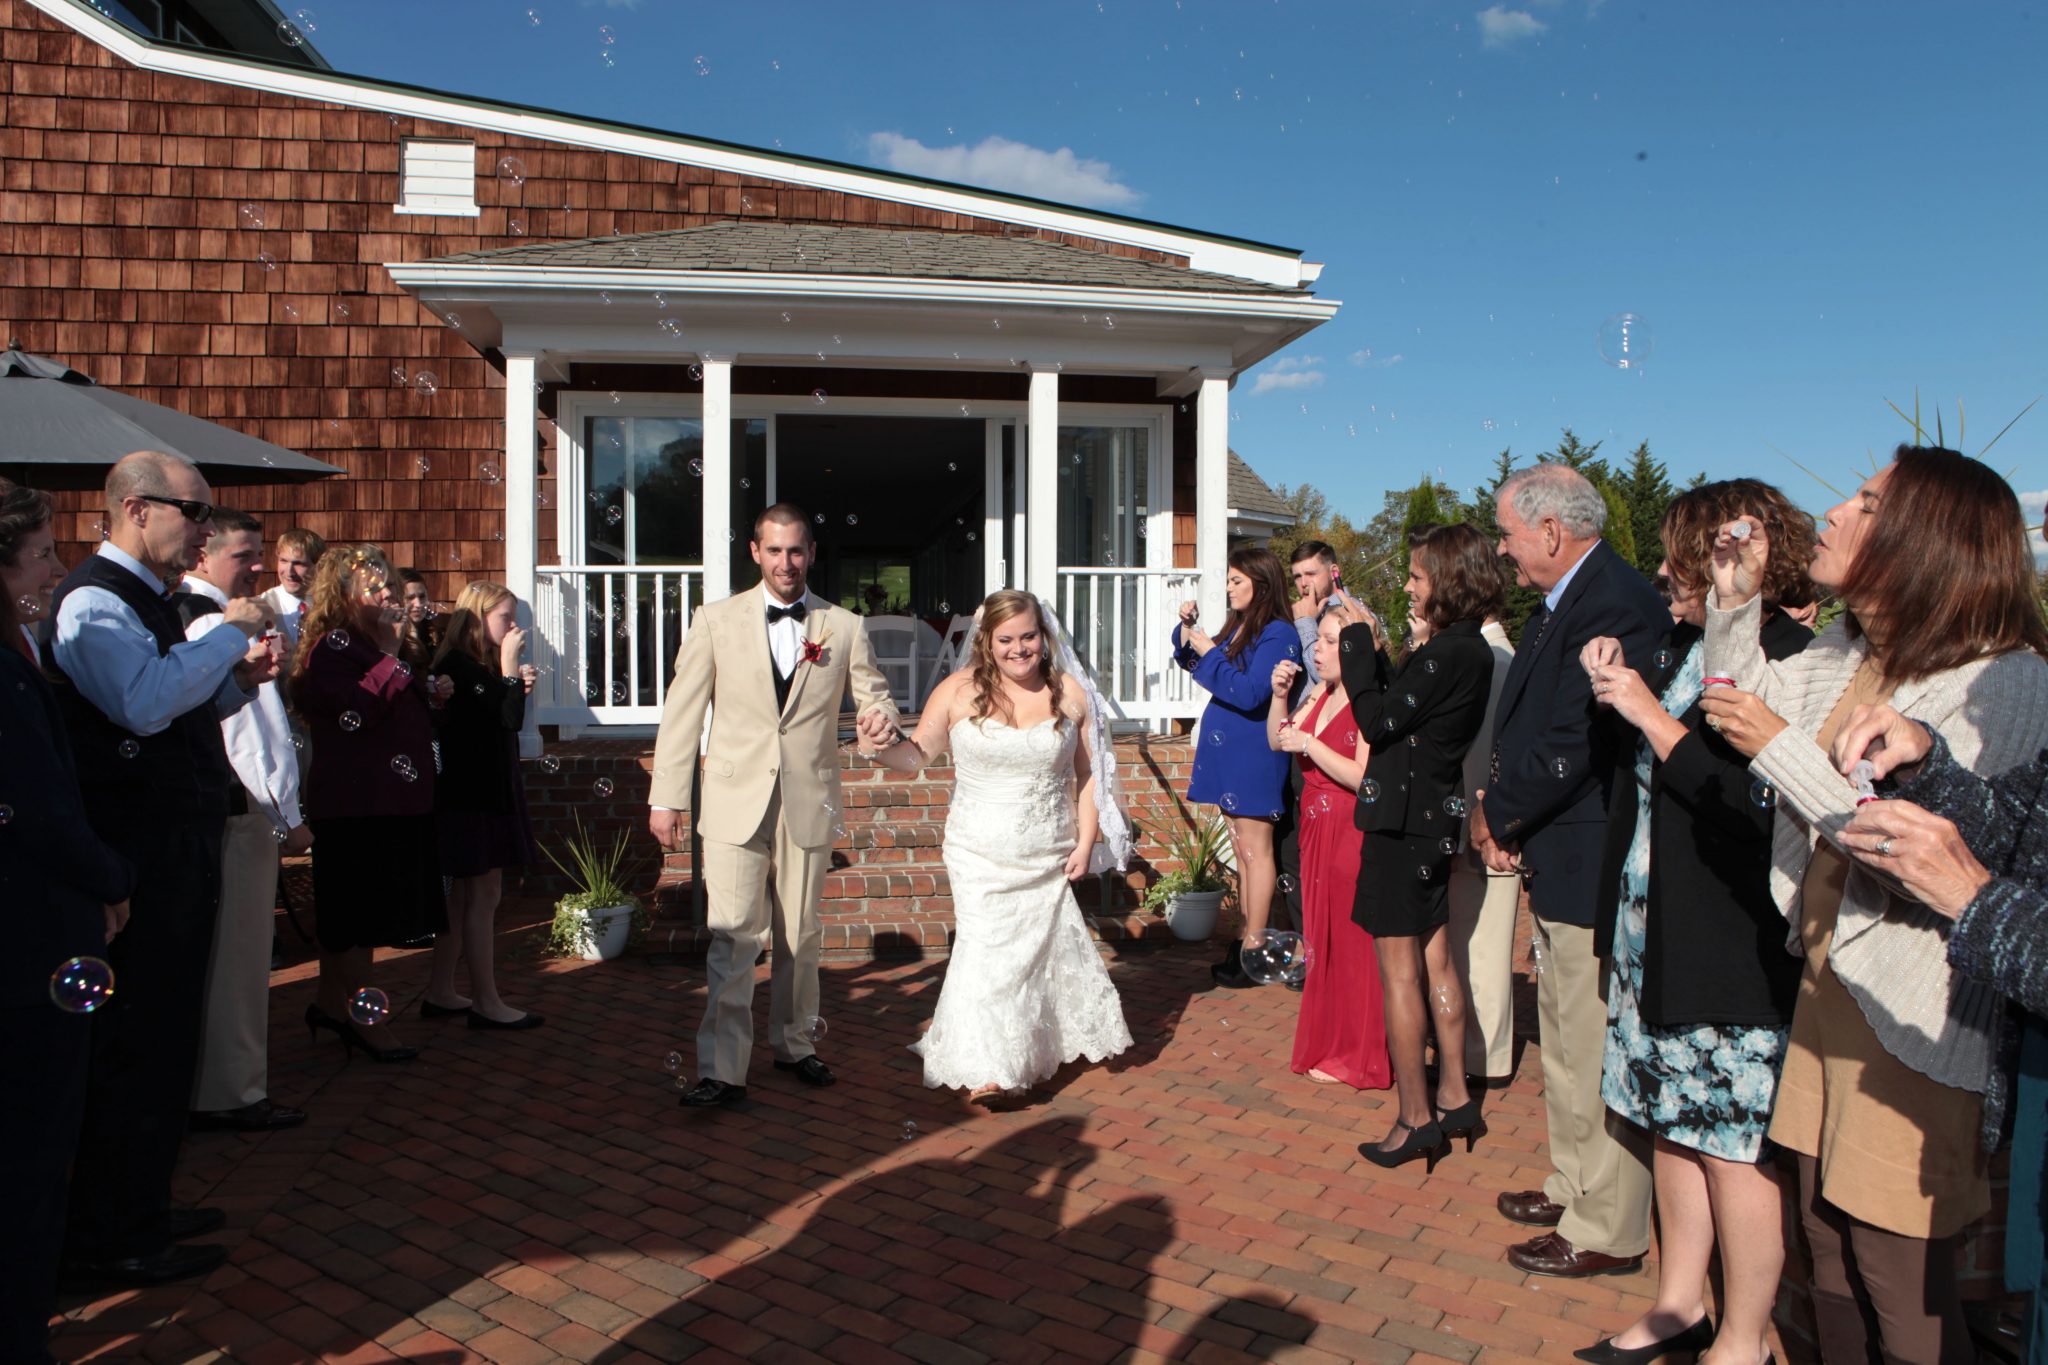 Couple walks from outdoor wedding pavilion after vows